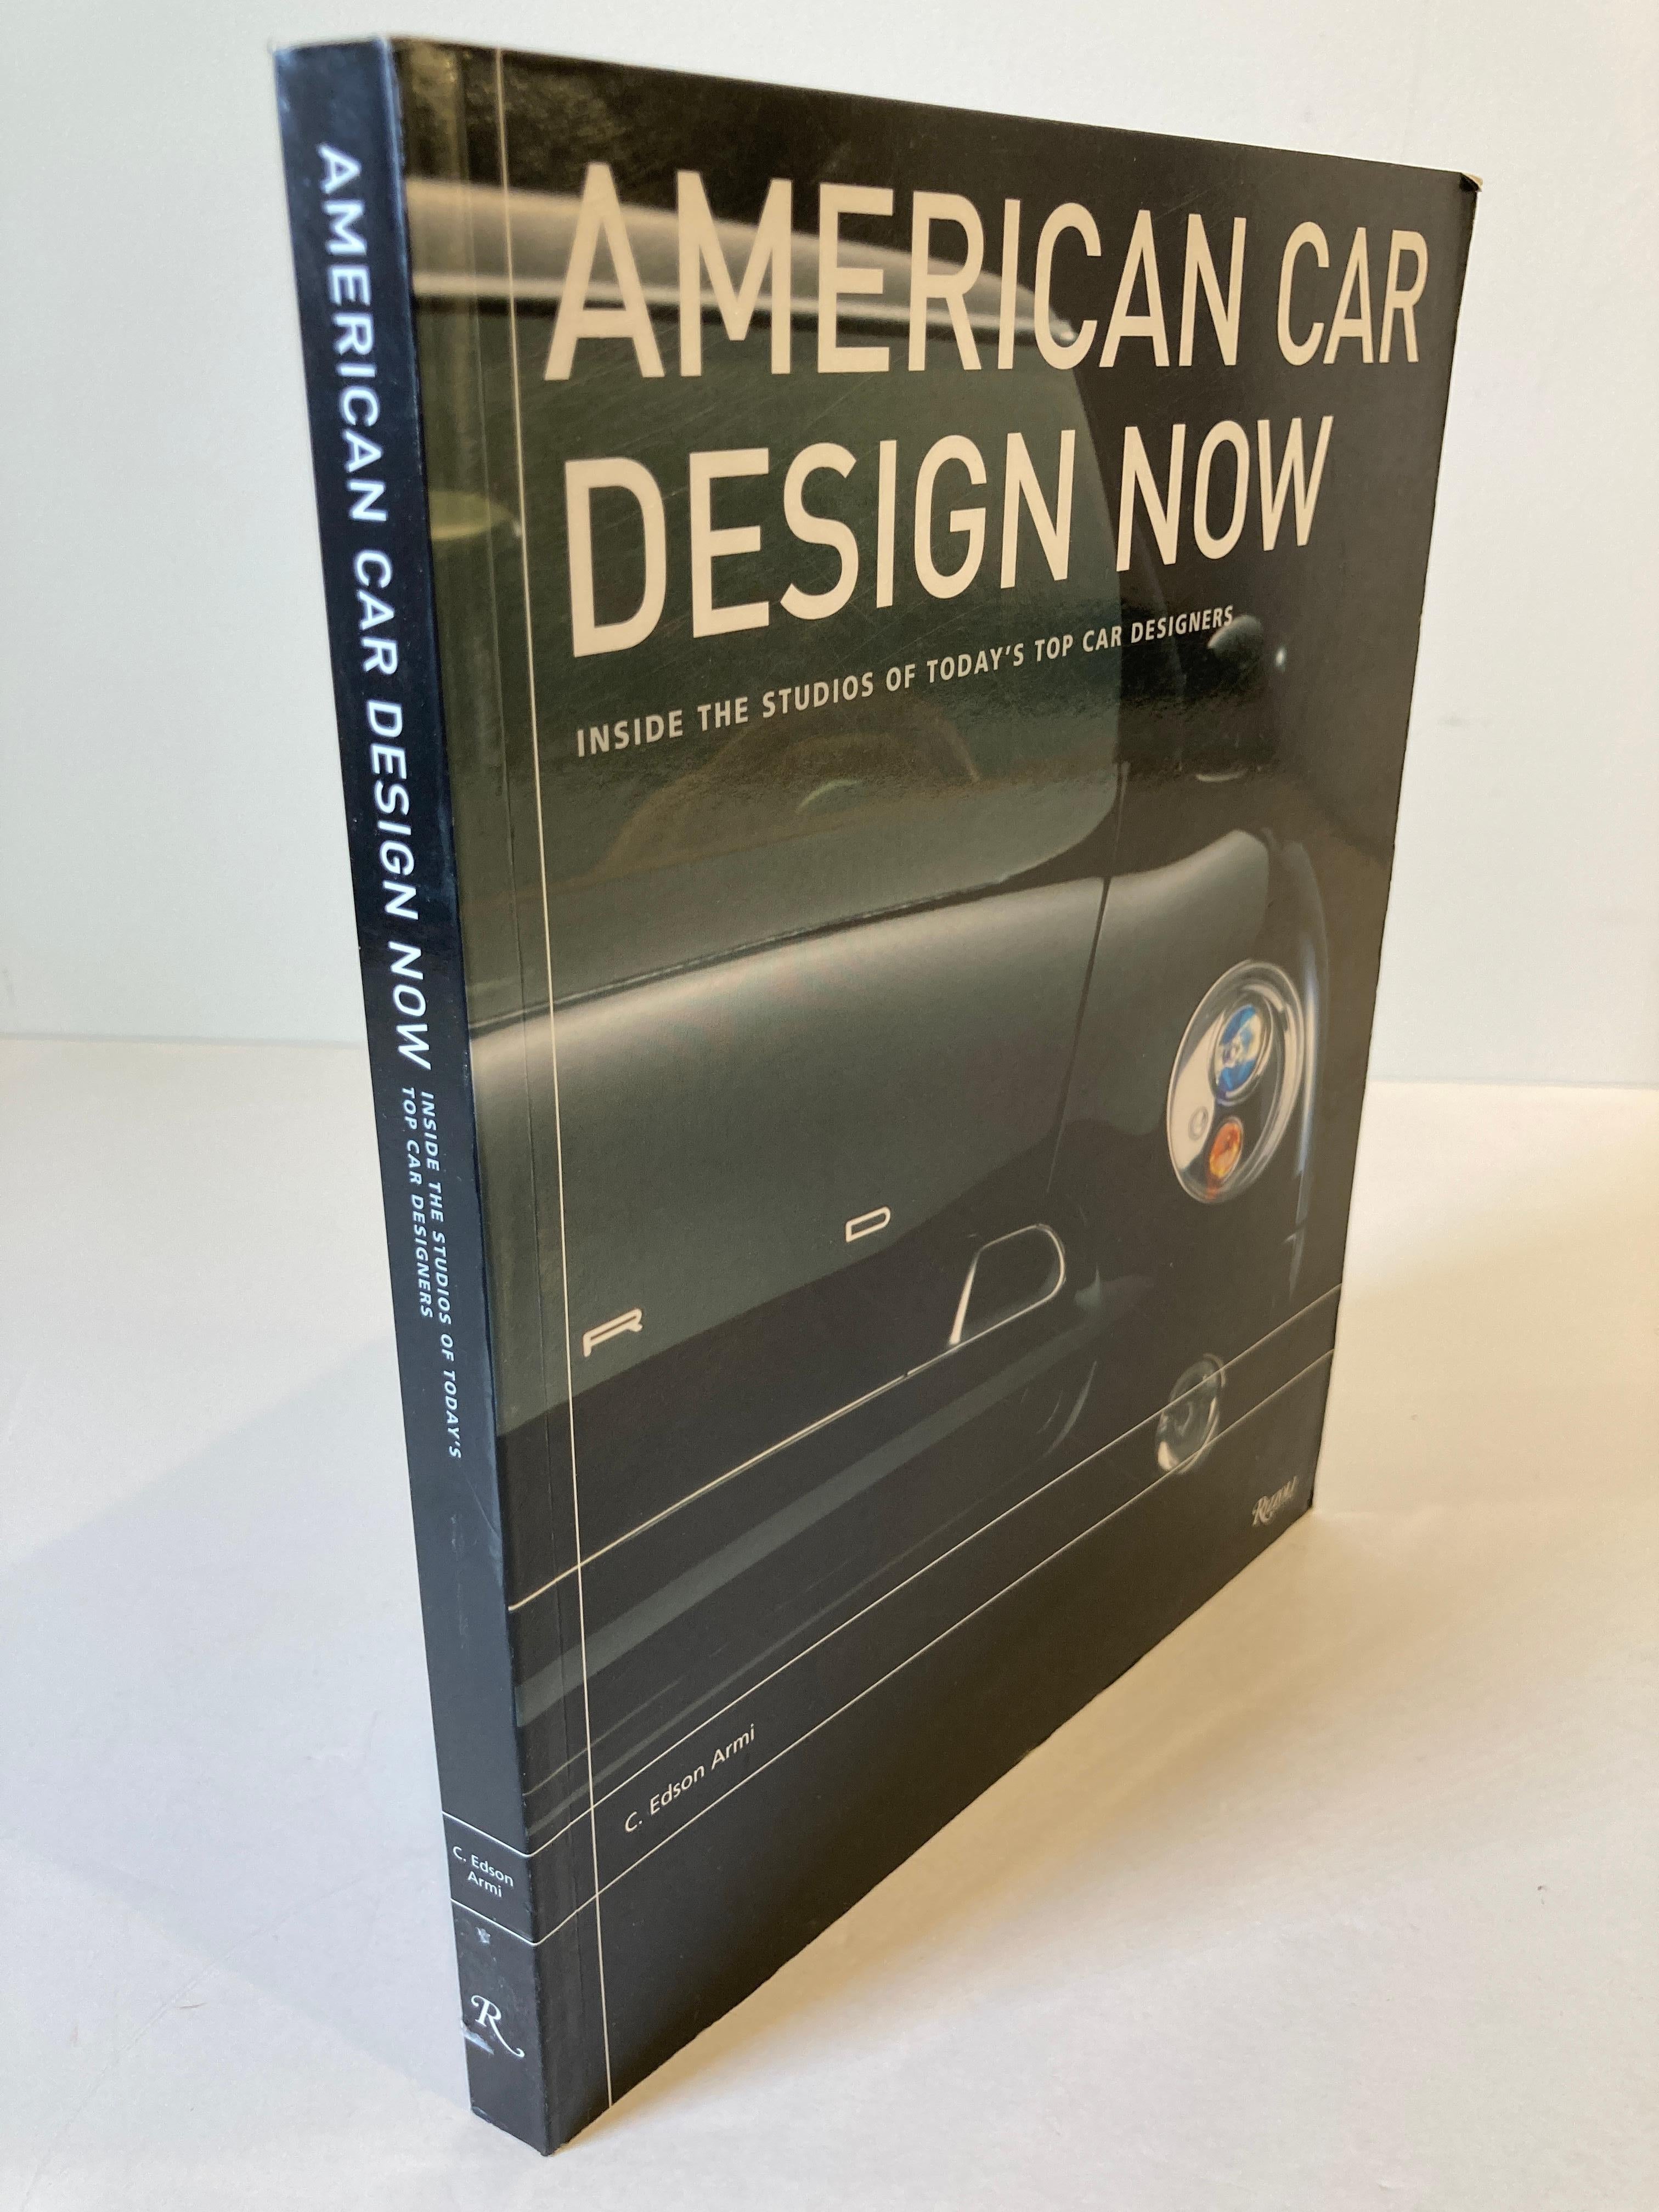 American Car Design Now: Inside the Studios of America's Top Car Designers
by C. Edson Armi.
This title provides in-depth examinations of the creative process behind more than 30 contemporary models that embody the trends of the future. The